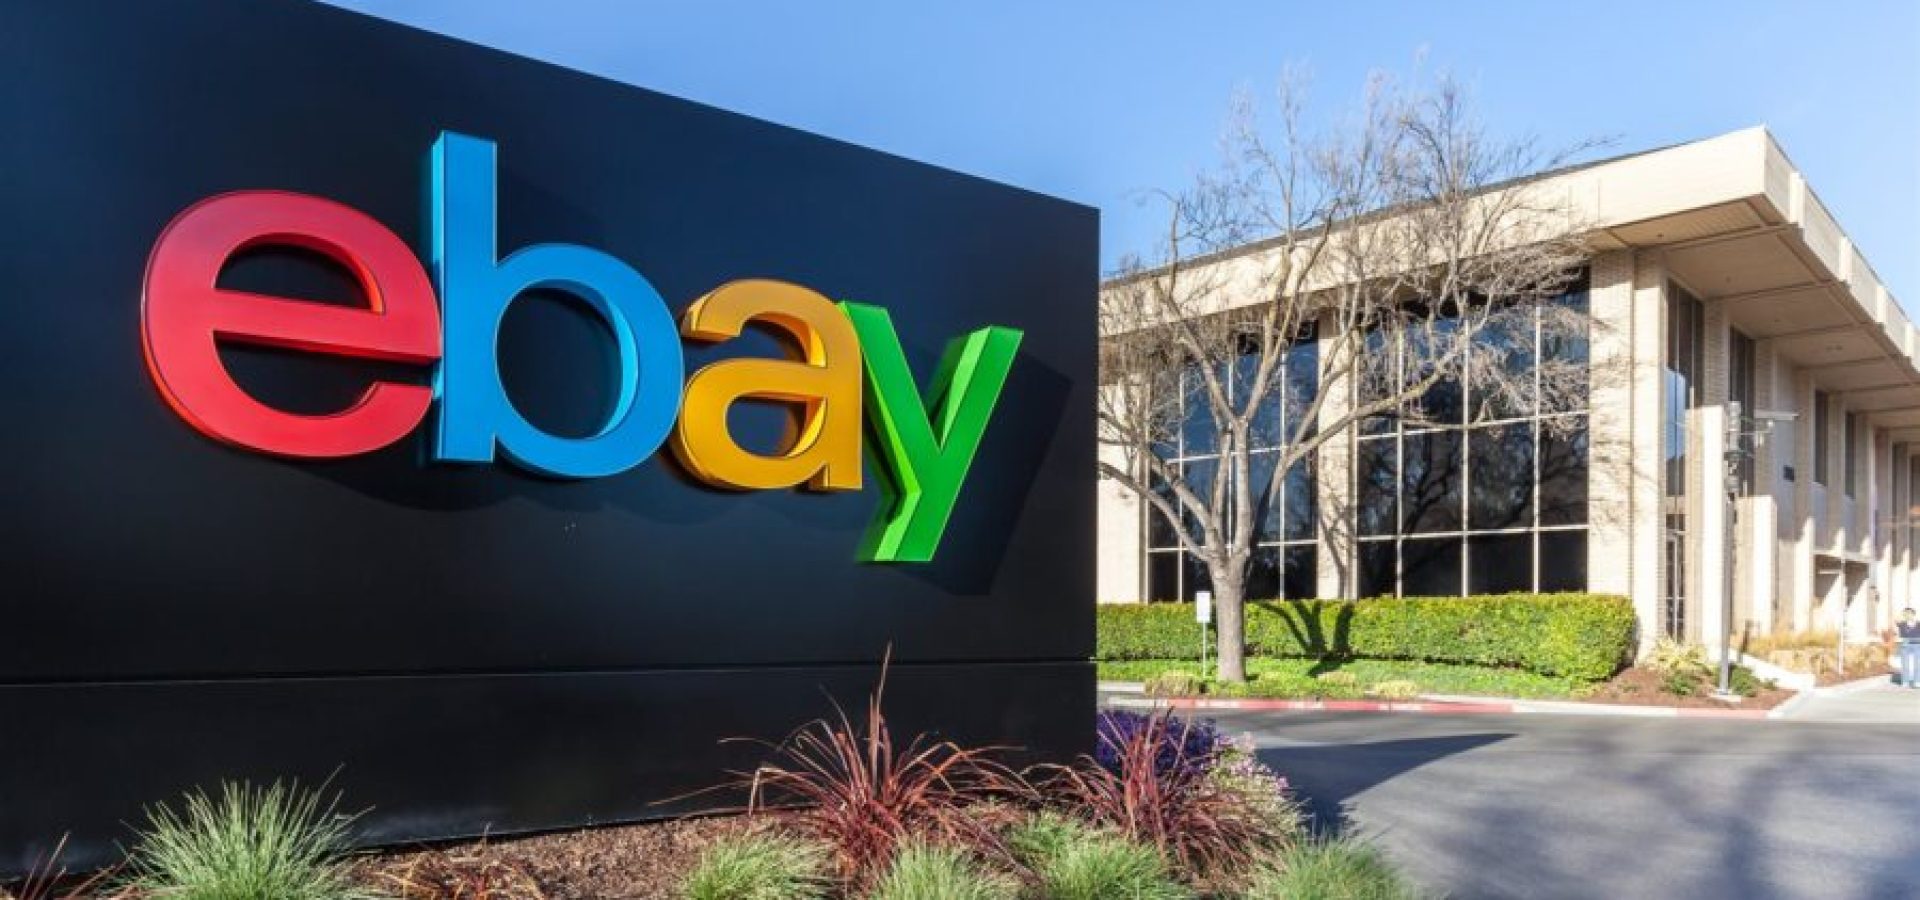 eBay and its classified ads business